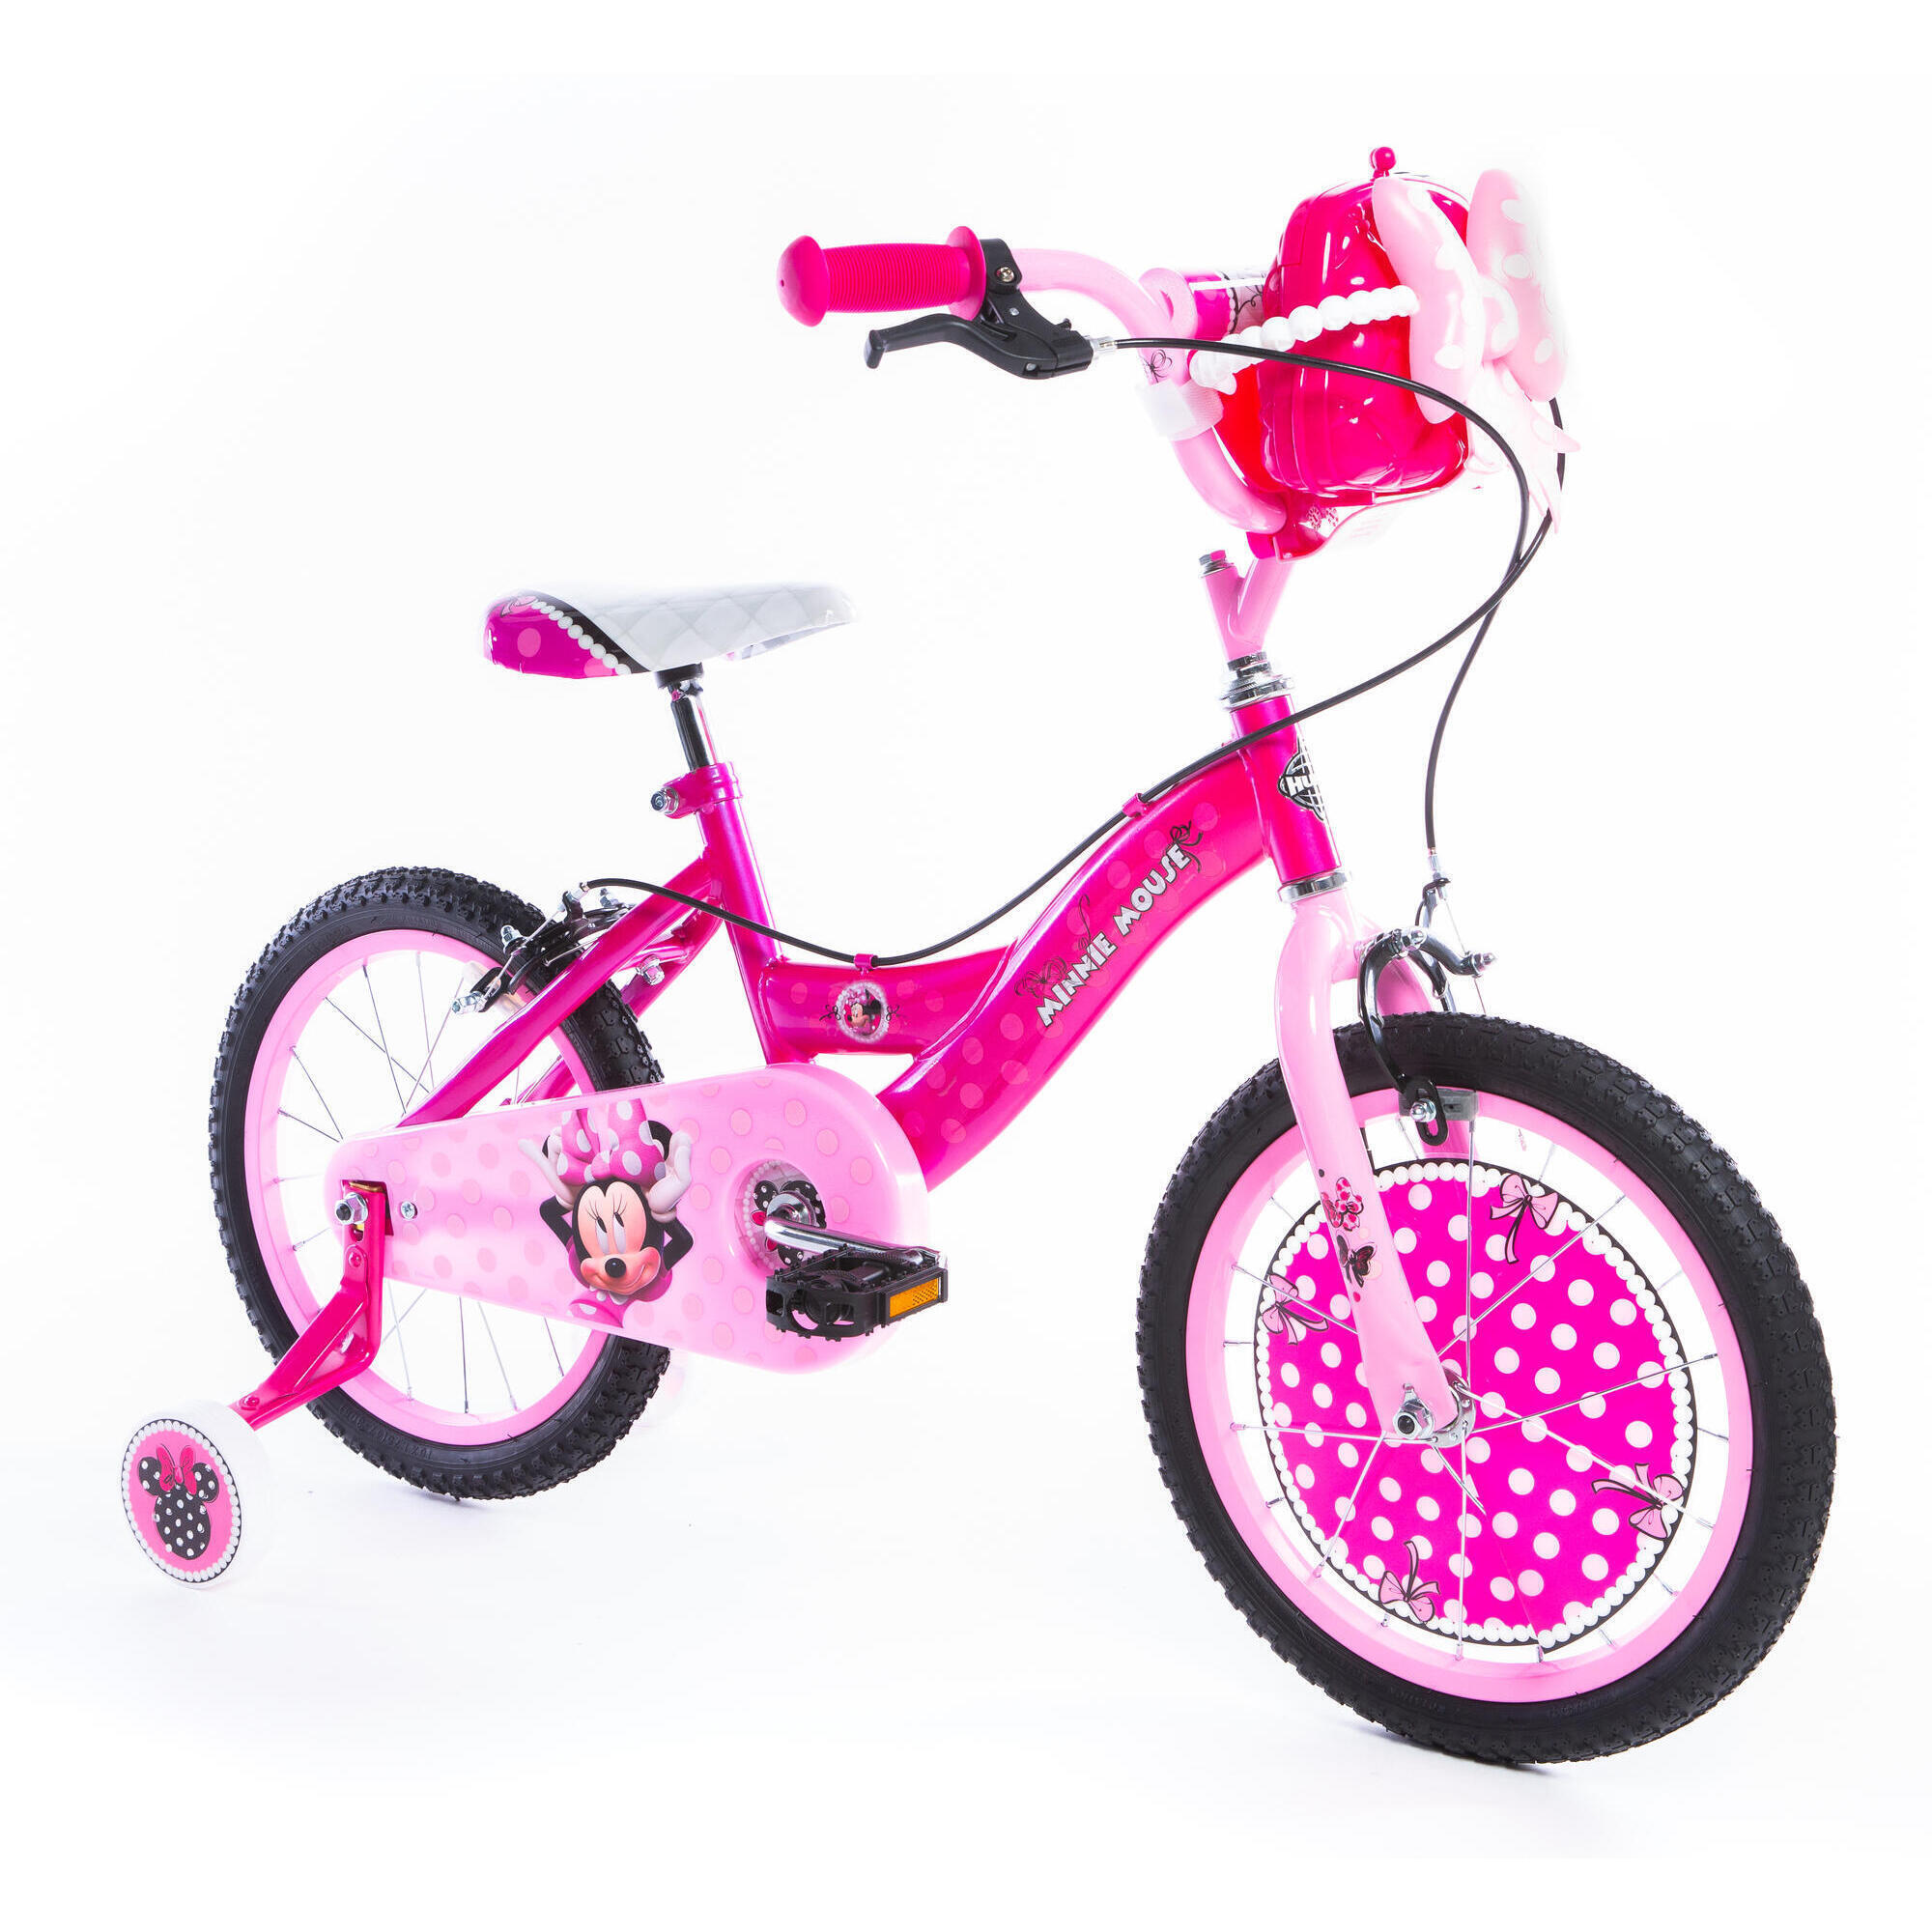 Huffy Disney Minnie Mouse Kids Bike 16 Inch Pink For 5-7 Year Old + stabilisers 1/8